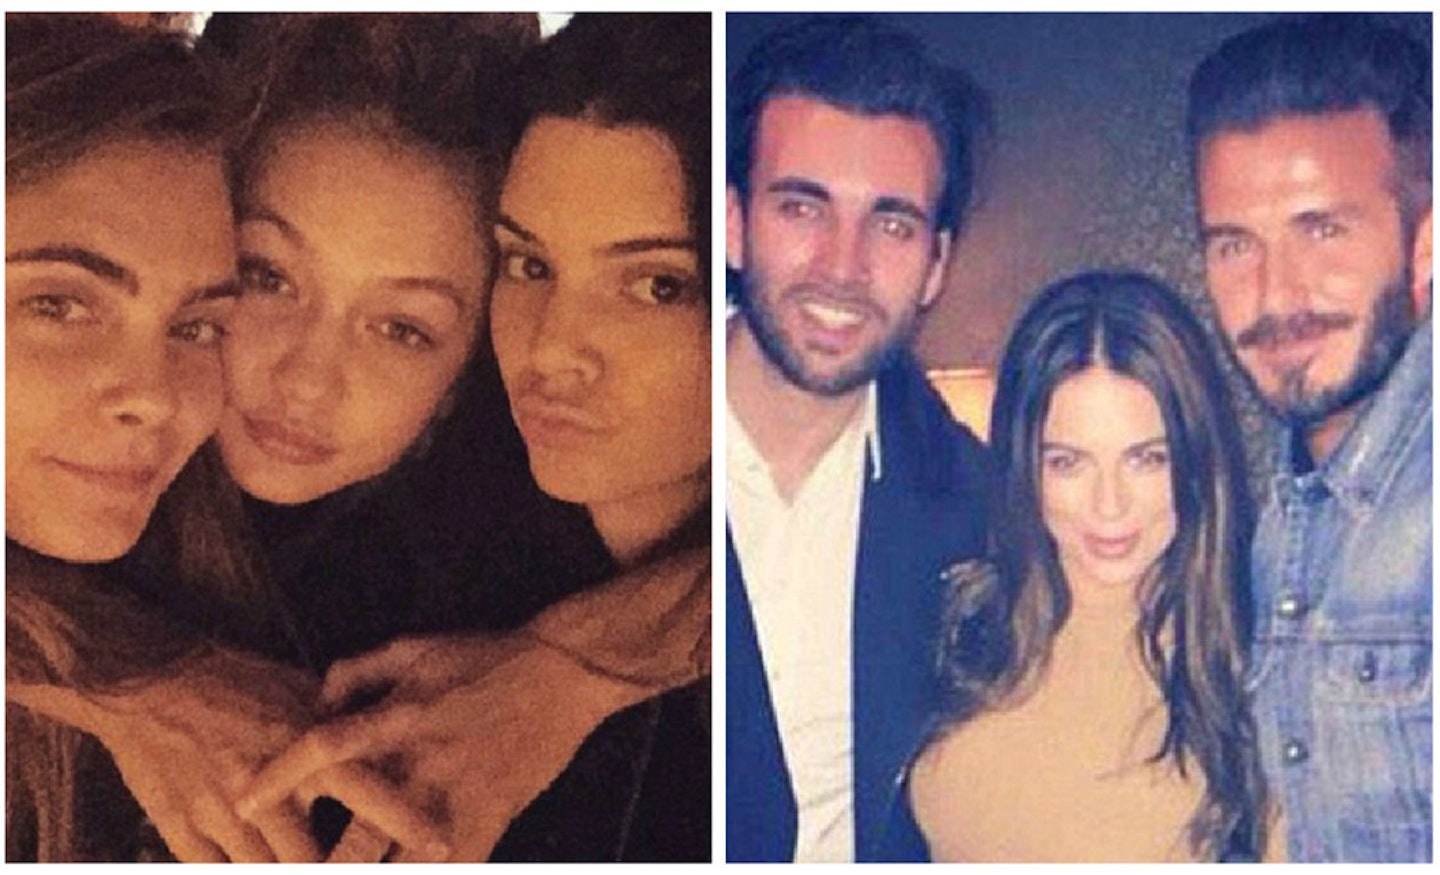 Cara Delevingne, Gigi Hadid, Kendall Jenner, Andy Samuels, Liam Payne's girlfriend Sophia and David Beckham all turned out for the bash [Instagram]